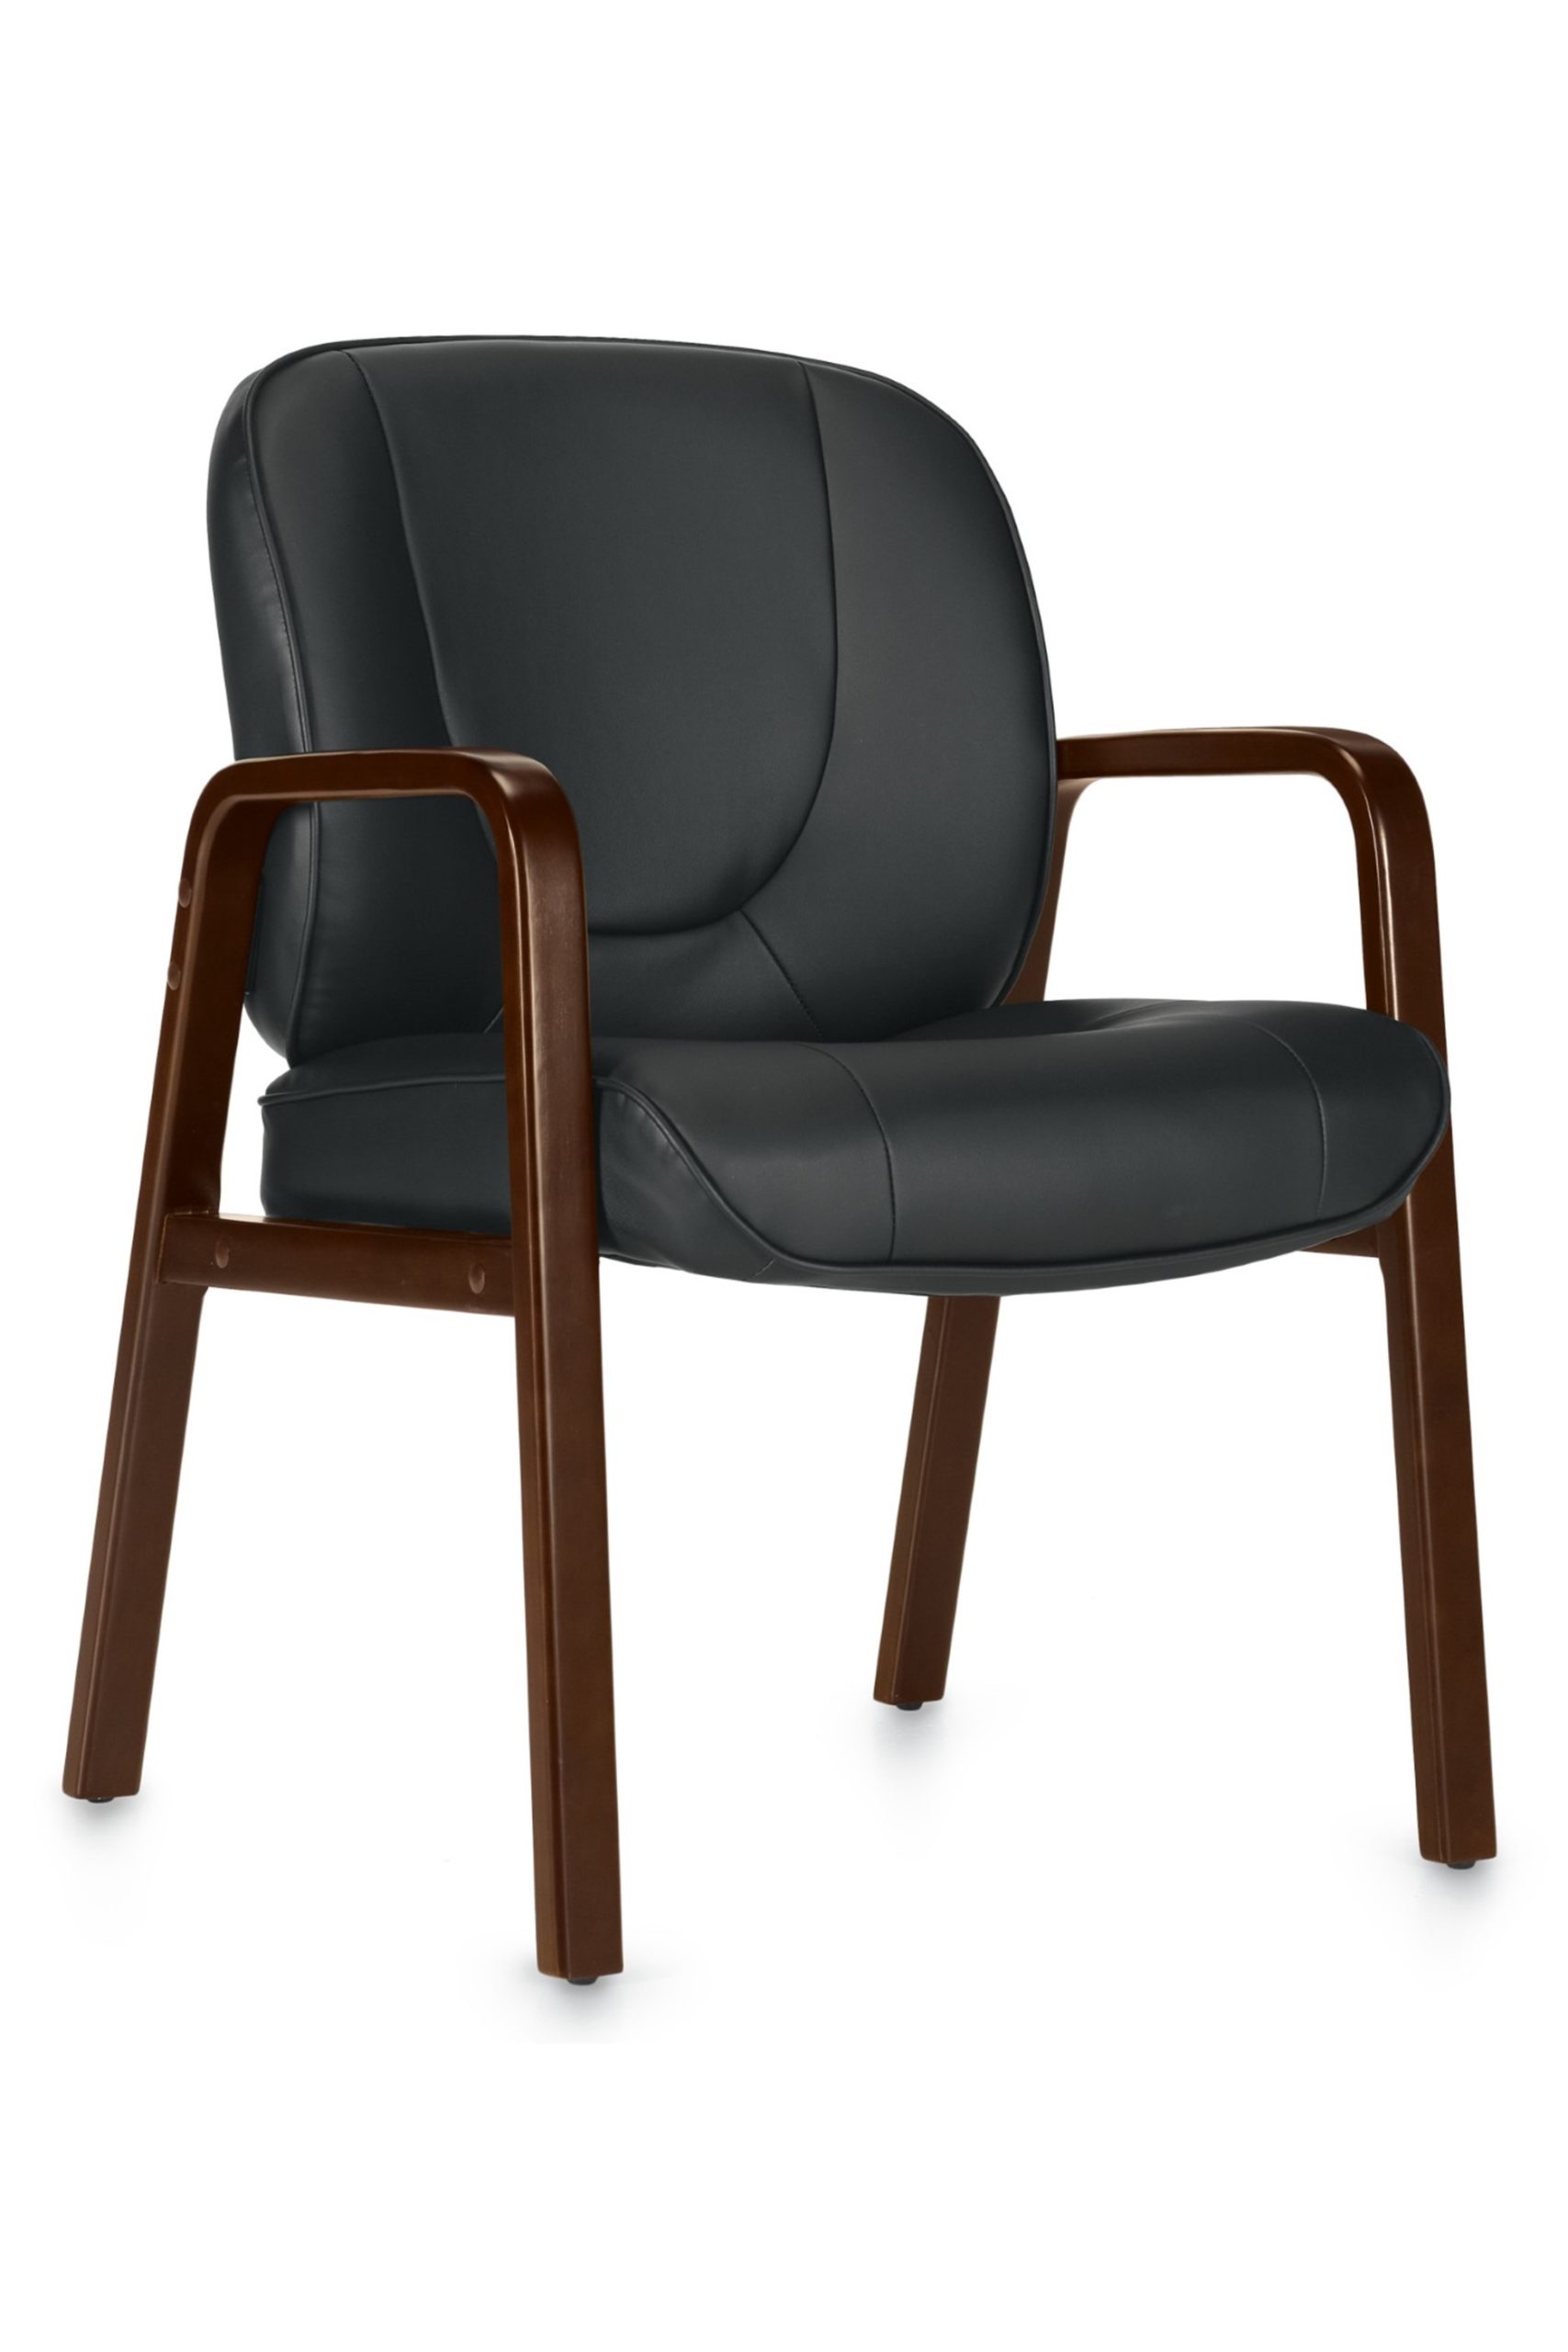 Black guest chair with wood arm and leg accents and Luxhide simulated leather seat and back.